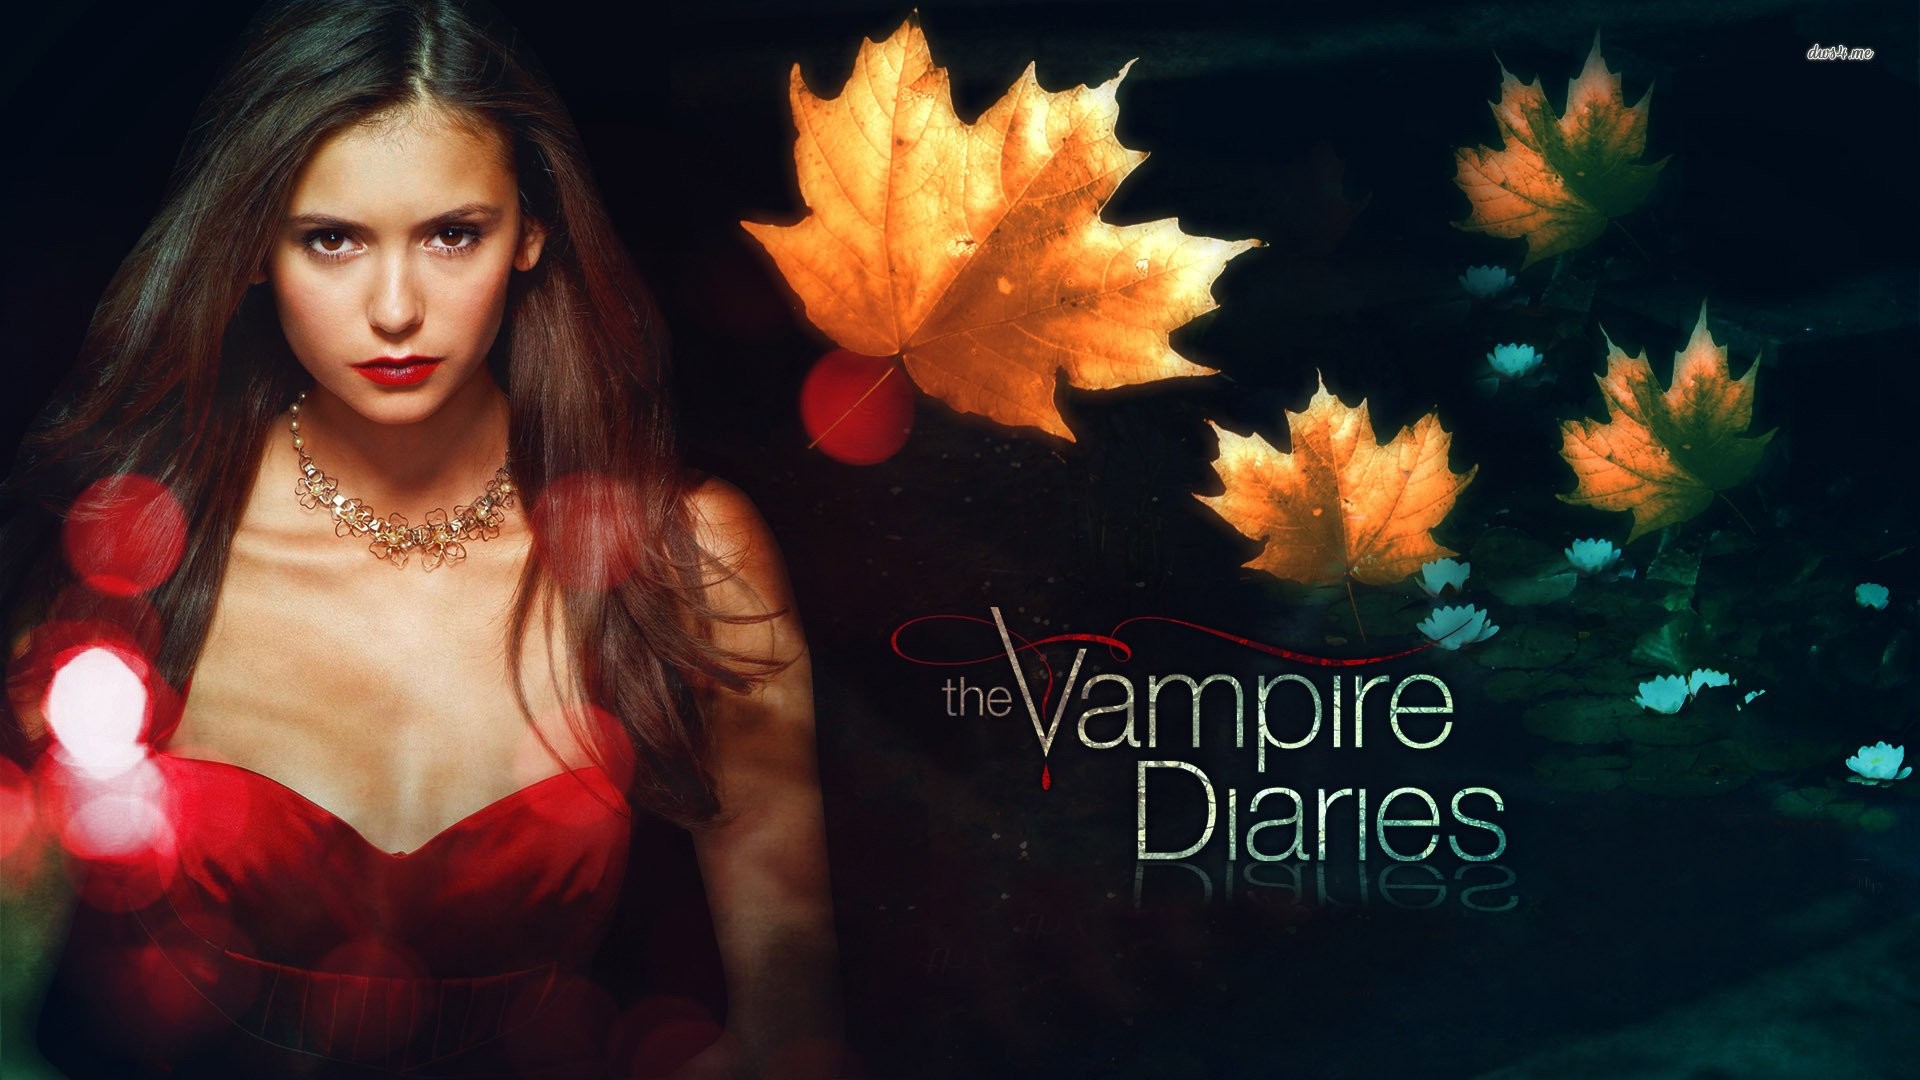 1920x1080 ... Damon And Elena - Wallpaper Cave 78 The Vampire Diaries HD Wallpapers |  Backgrounds - Wallpaper Abyss ...